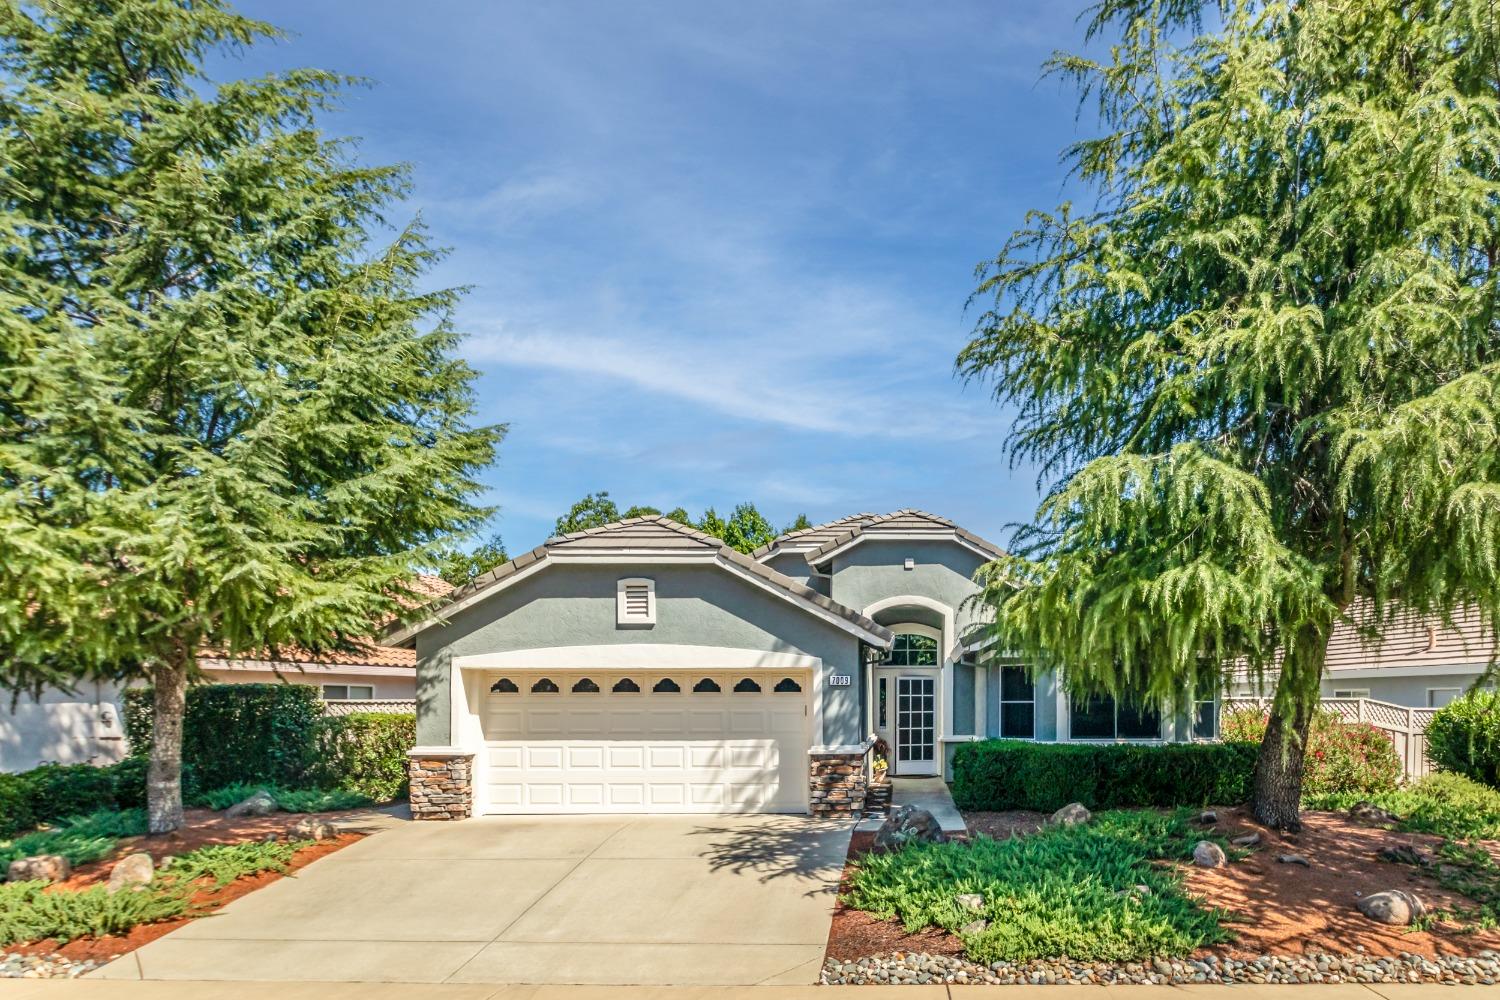 7009 Stagecoach, Roseville, CA 95747